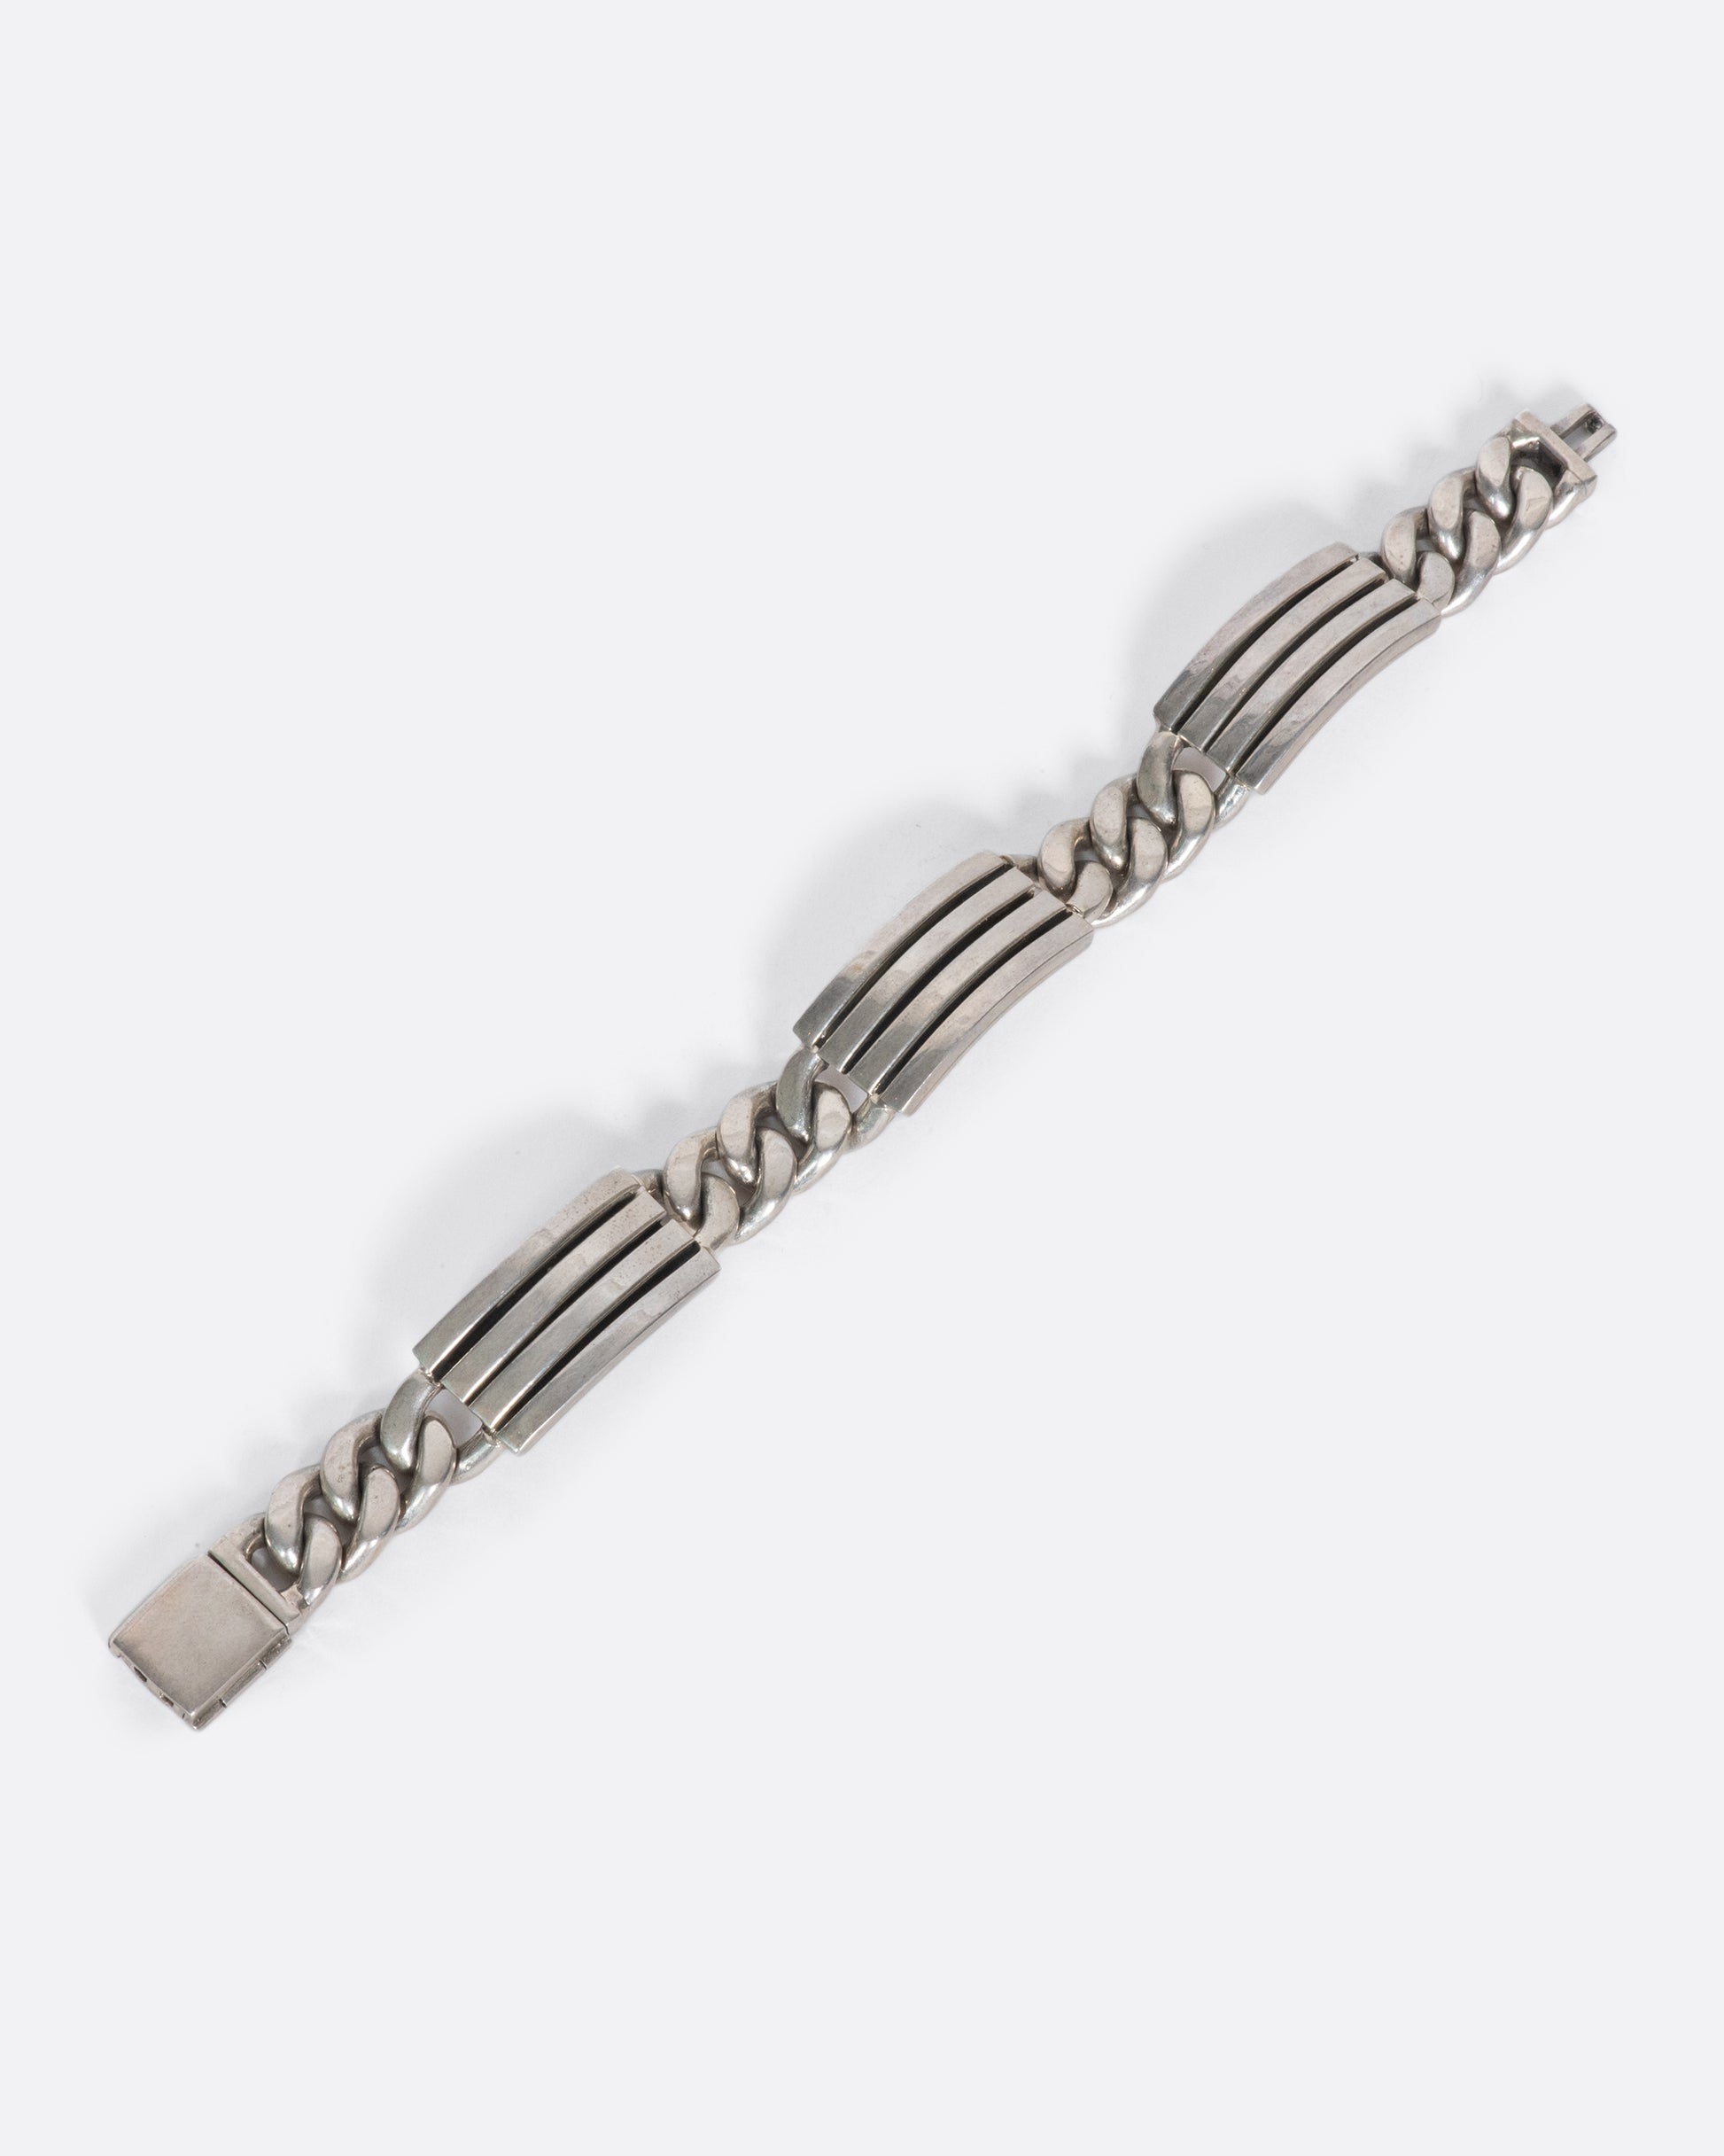 A vintage Mexican sterling silver bracelet with alternating ribbed segments and curb chain connections. It's heavy weight and unique design create a substantial presence on your wrist, solo or stacked.